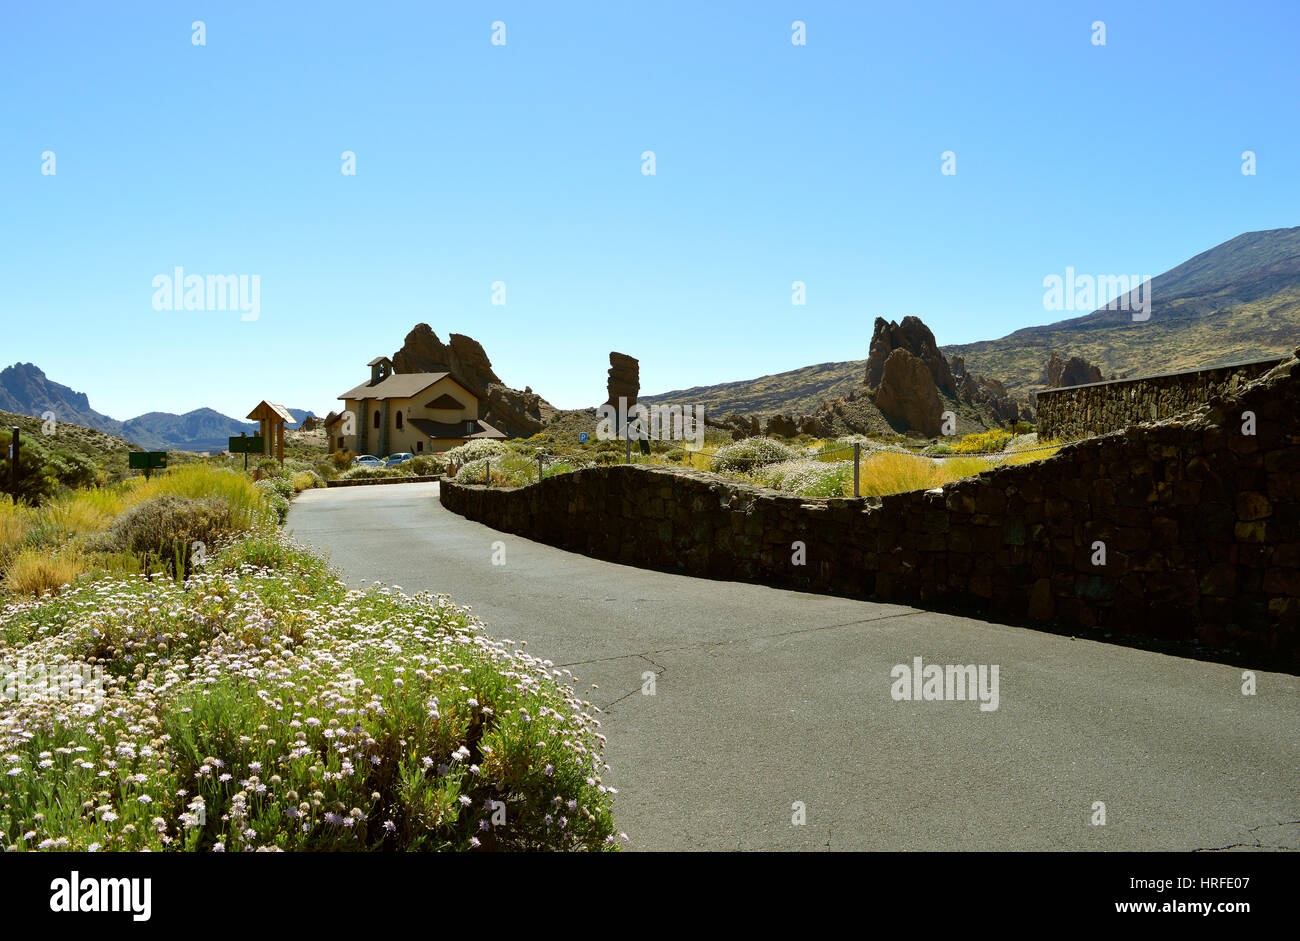 Mount Teide National Park Hermitage of Our Lady of the Snows church Stock Photo